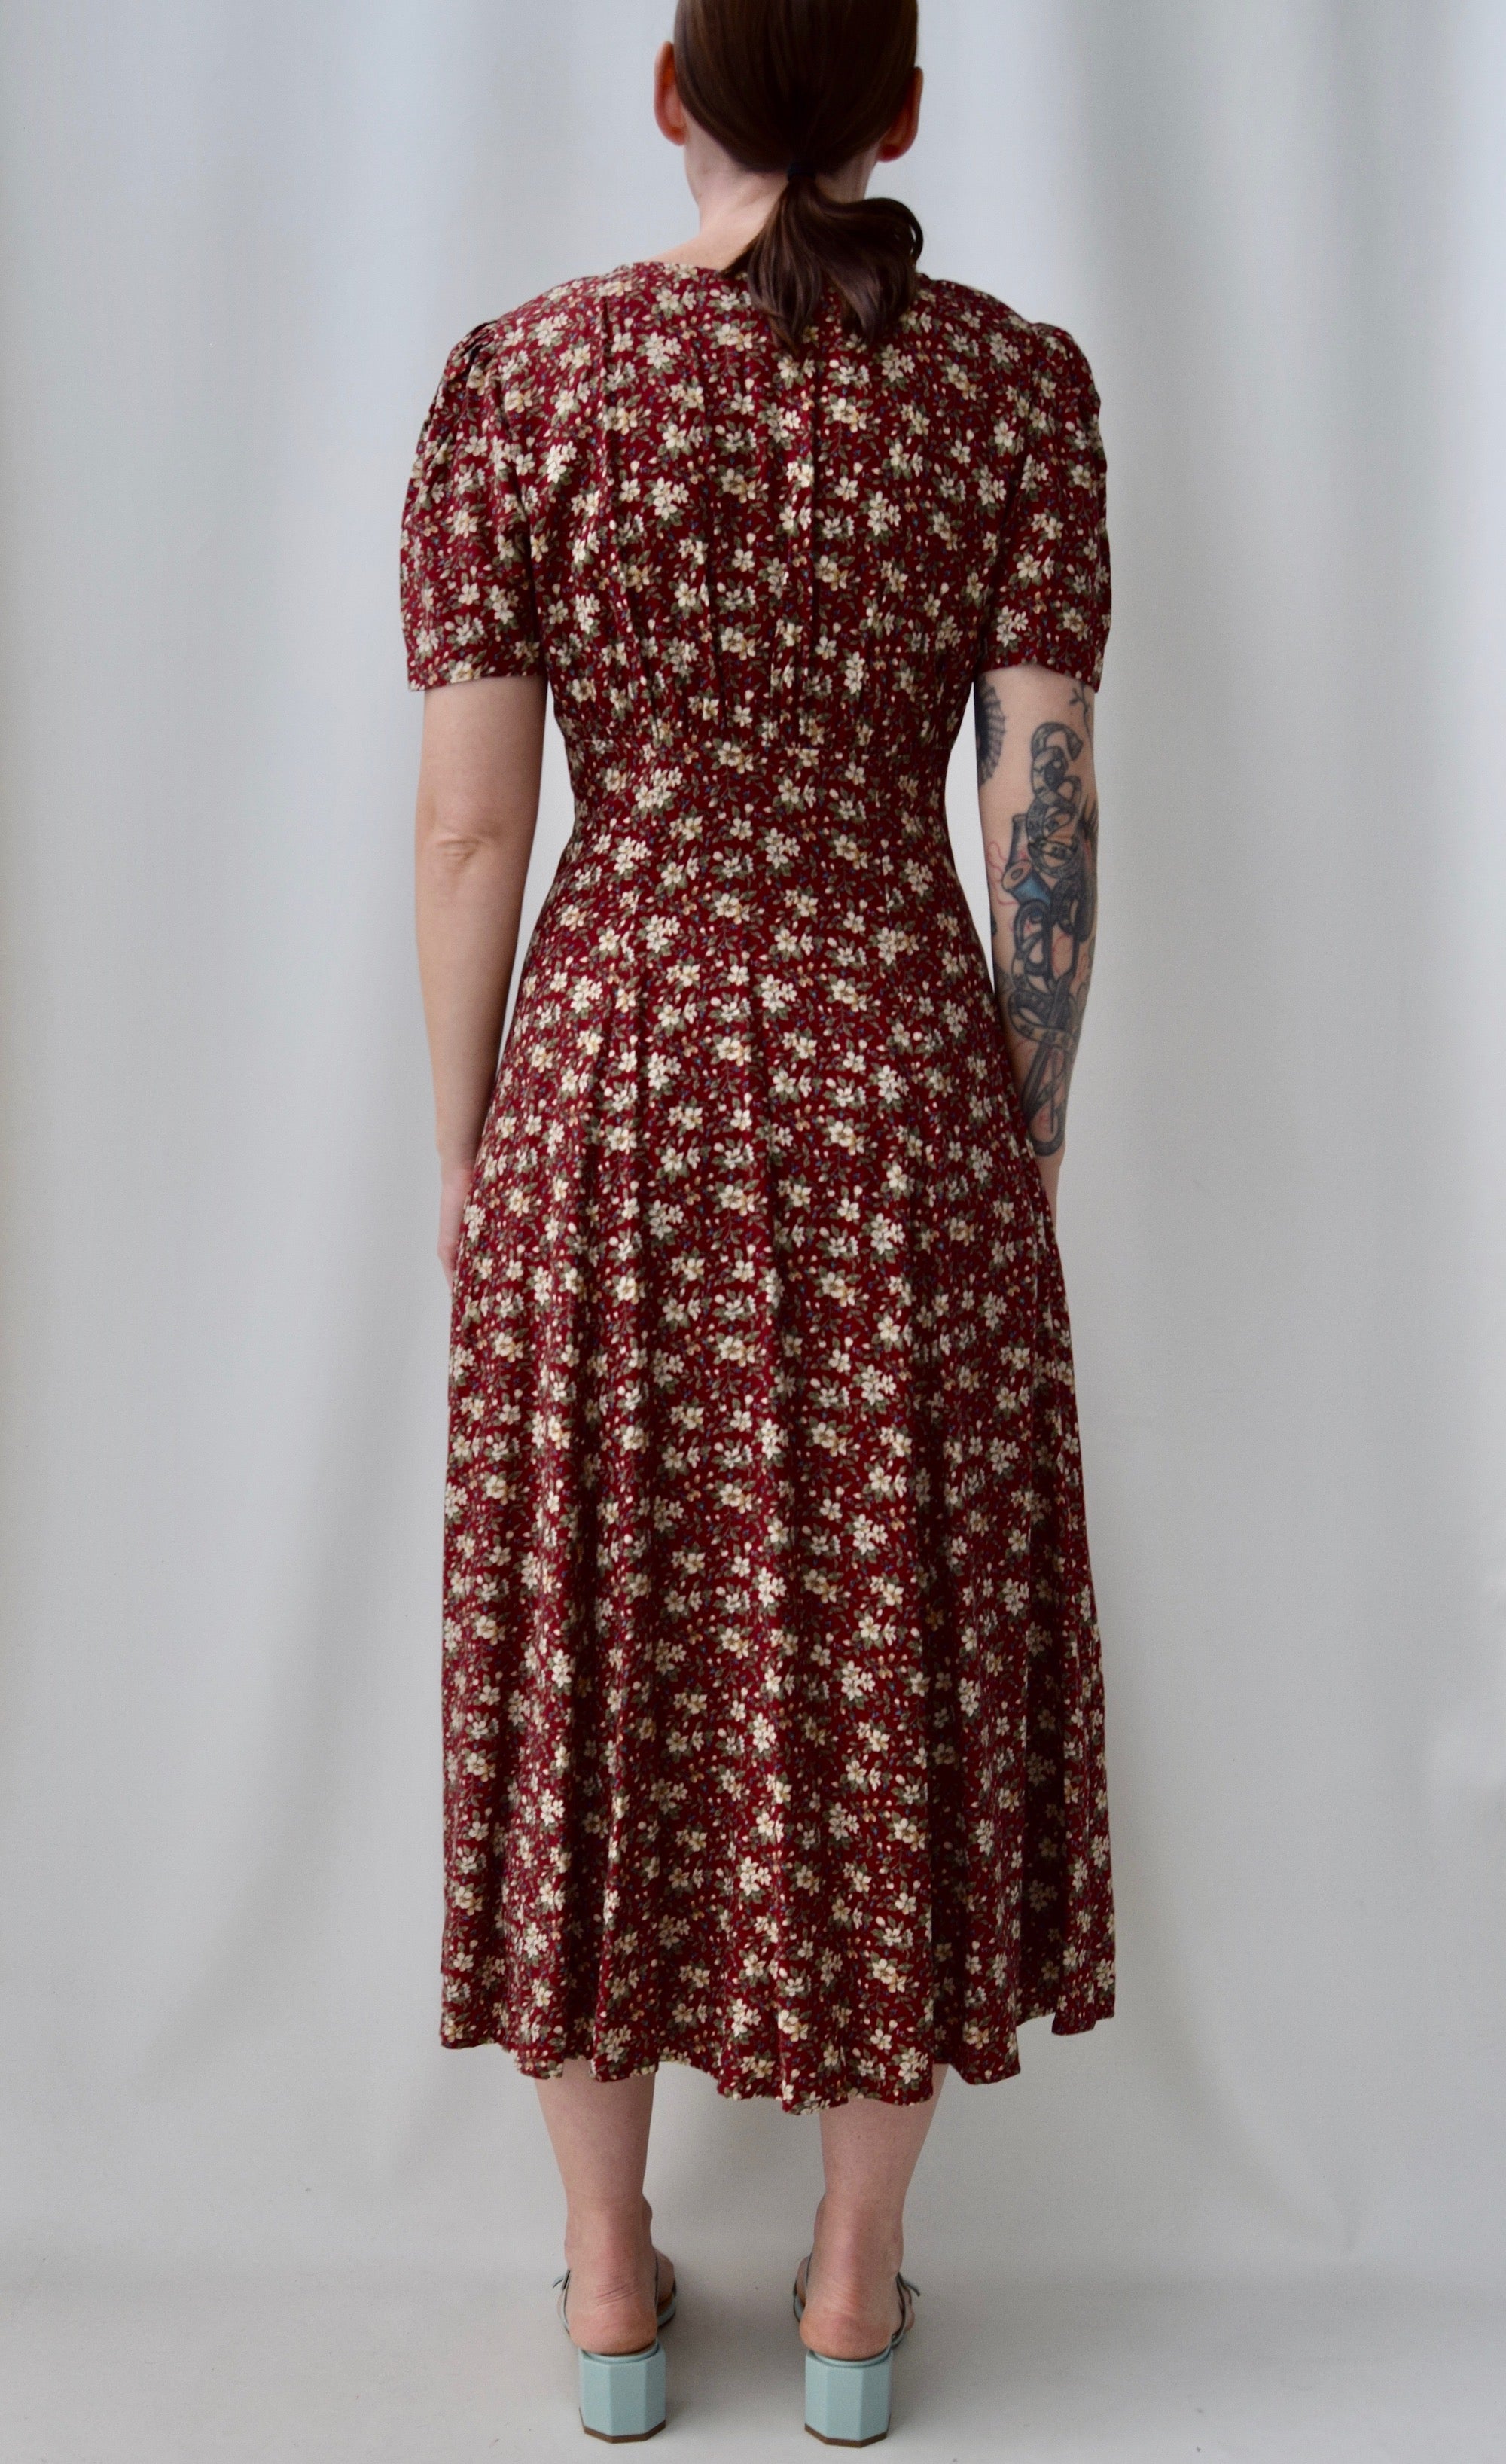 90's "All That Jazz" Floral Wine Dress